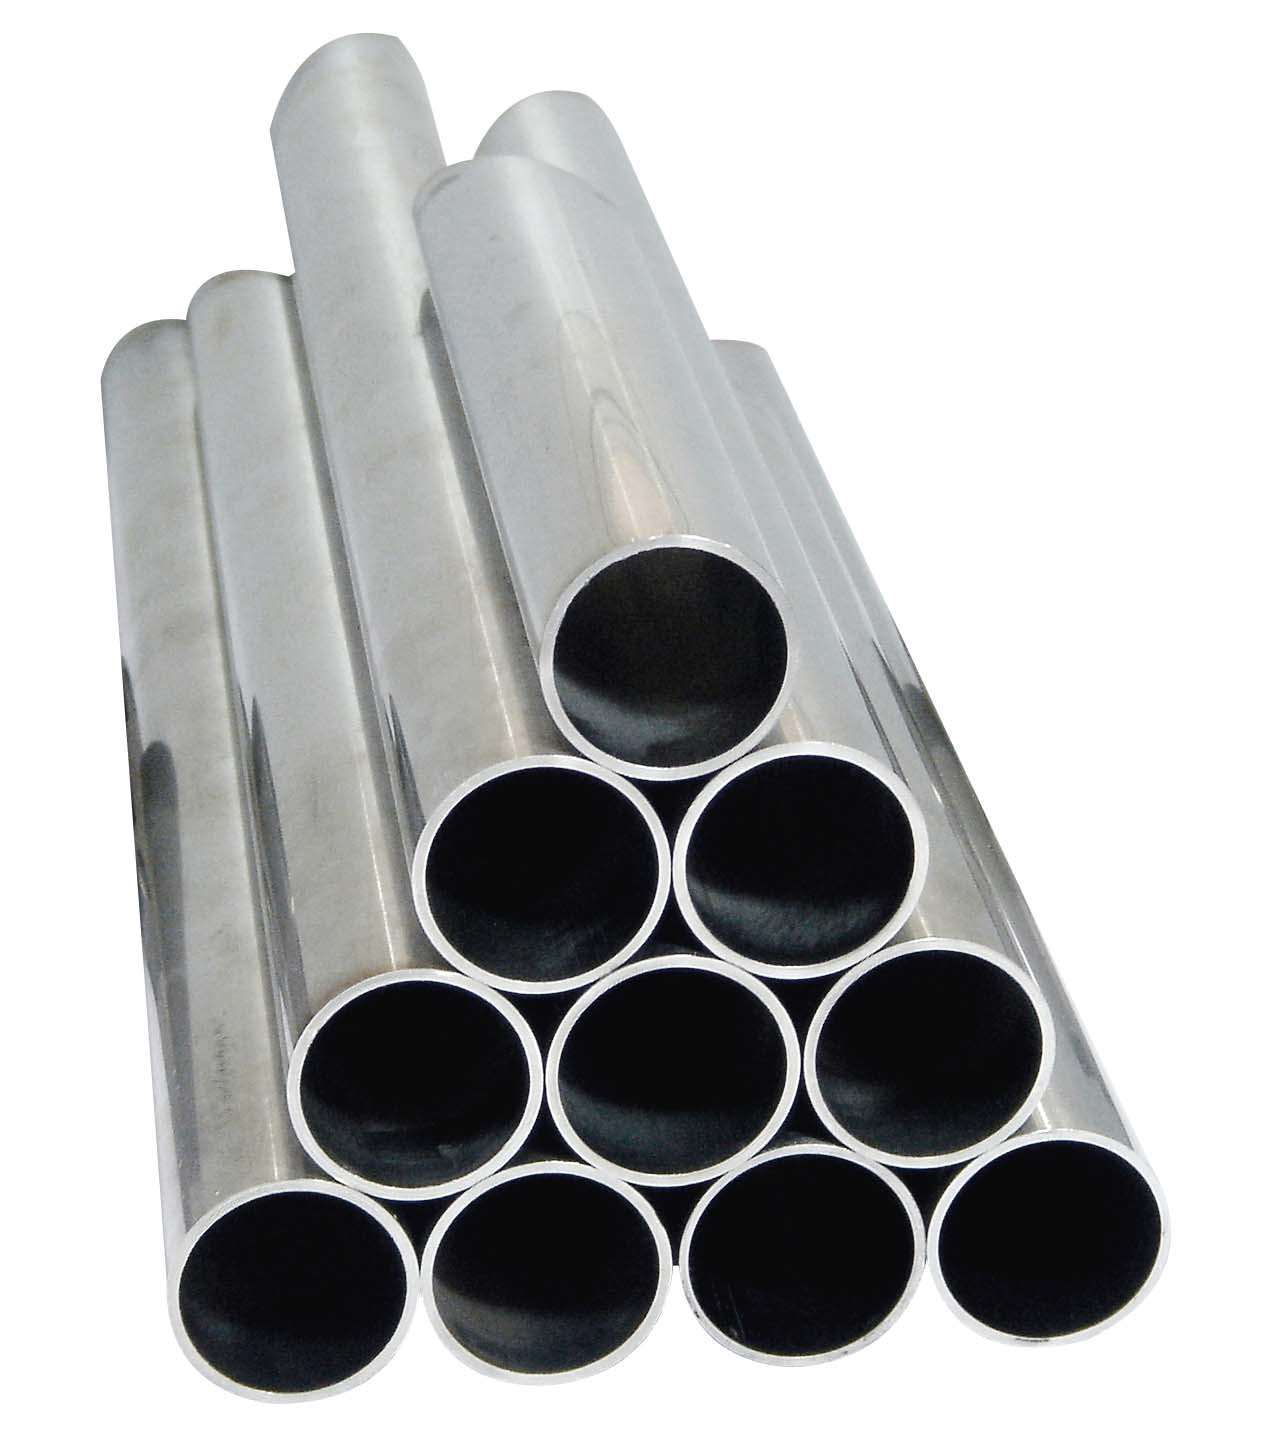 STAINLESS STEEL PIPE EXTR